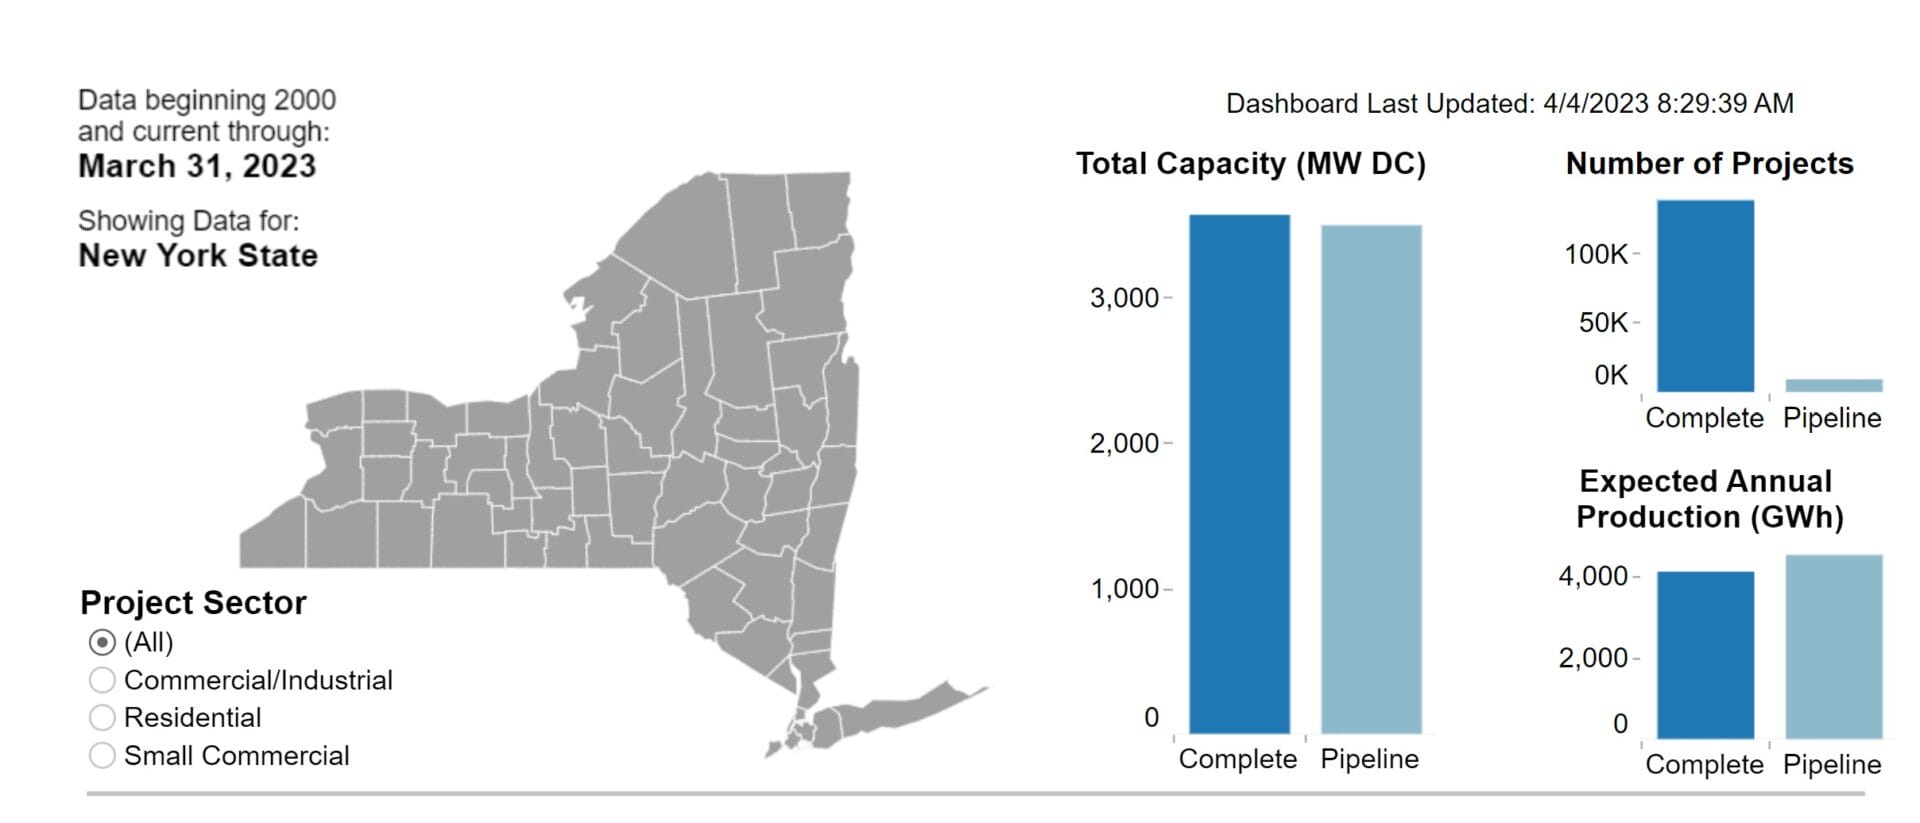 This map of New York State shows New York's total capacity vs capacity in the pipeline in MW DC. It also includes data on the number of complete vs pipeline projects, and the expected annual production of completed projects vs pipeline projects in GWh